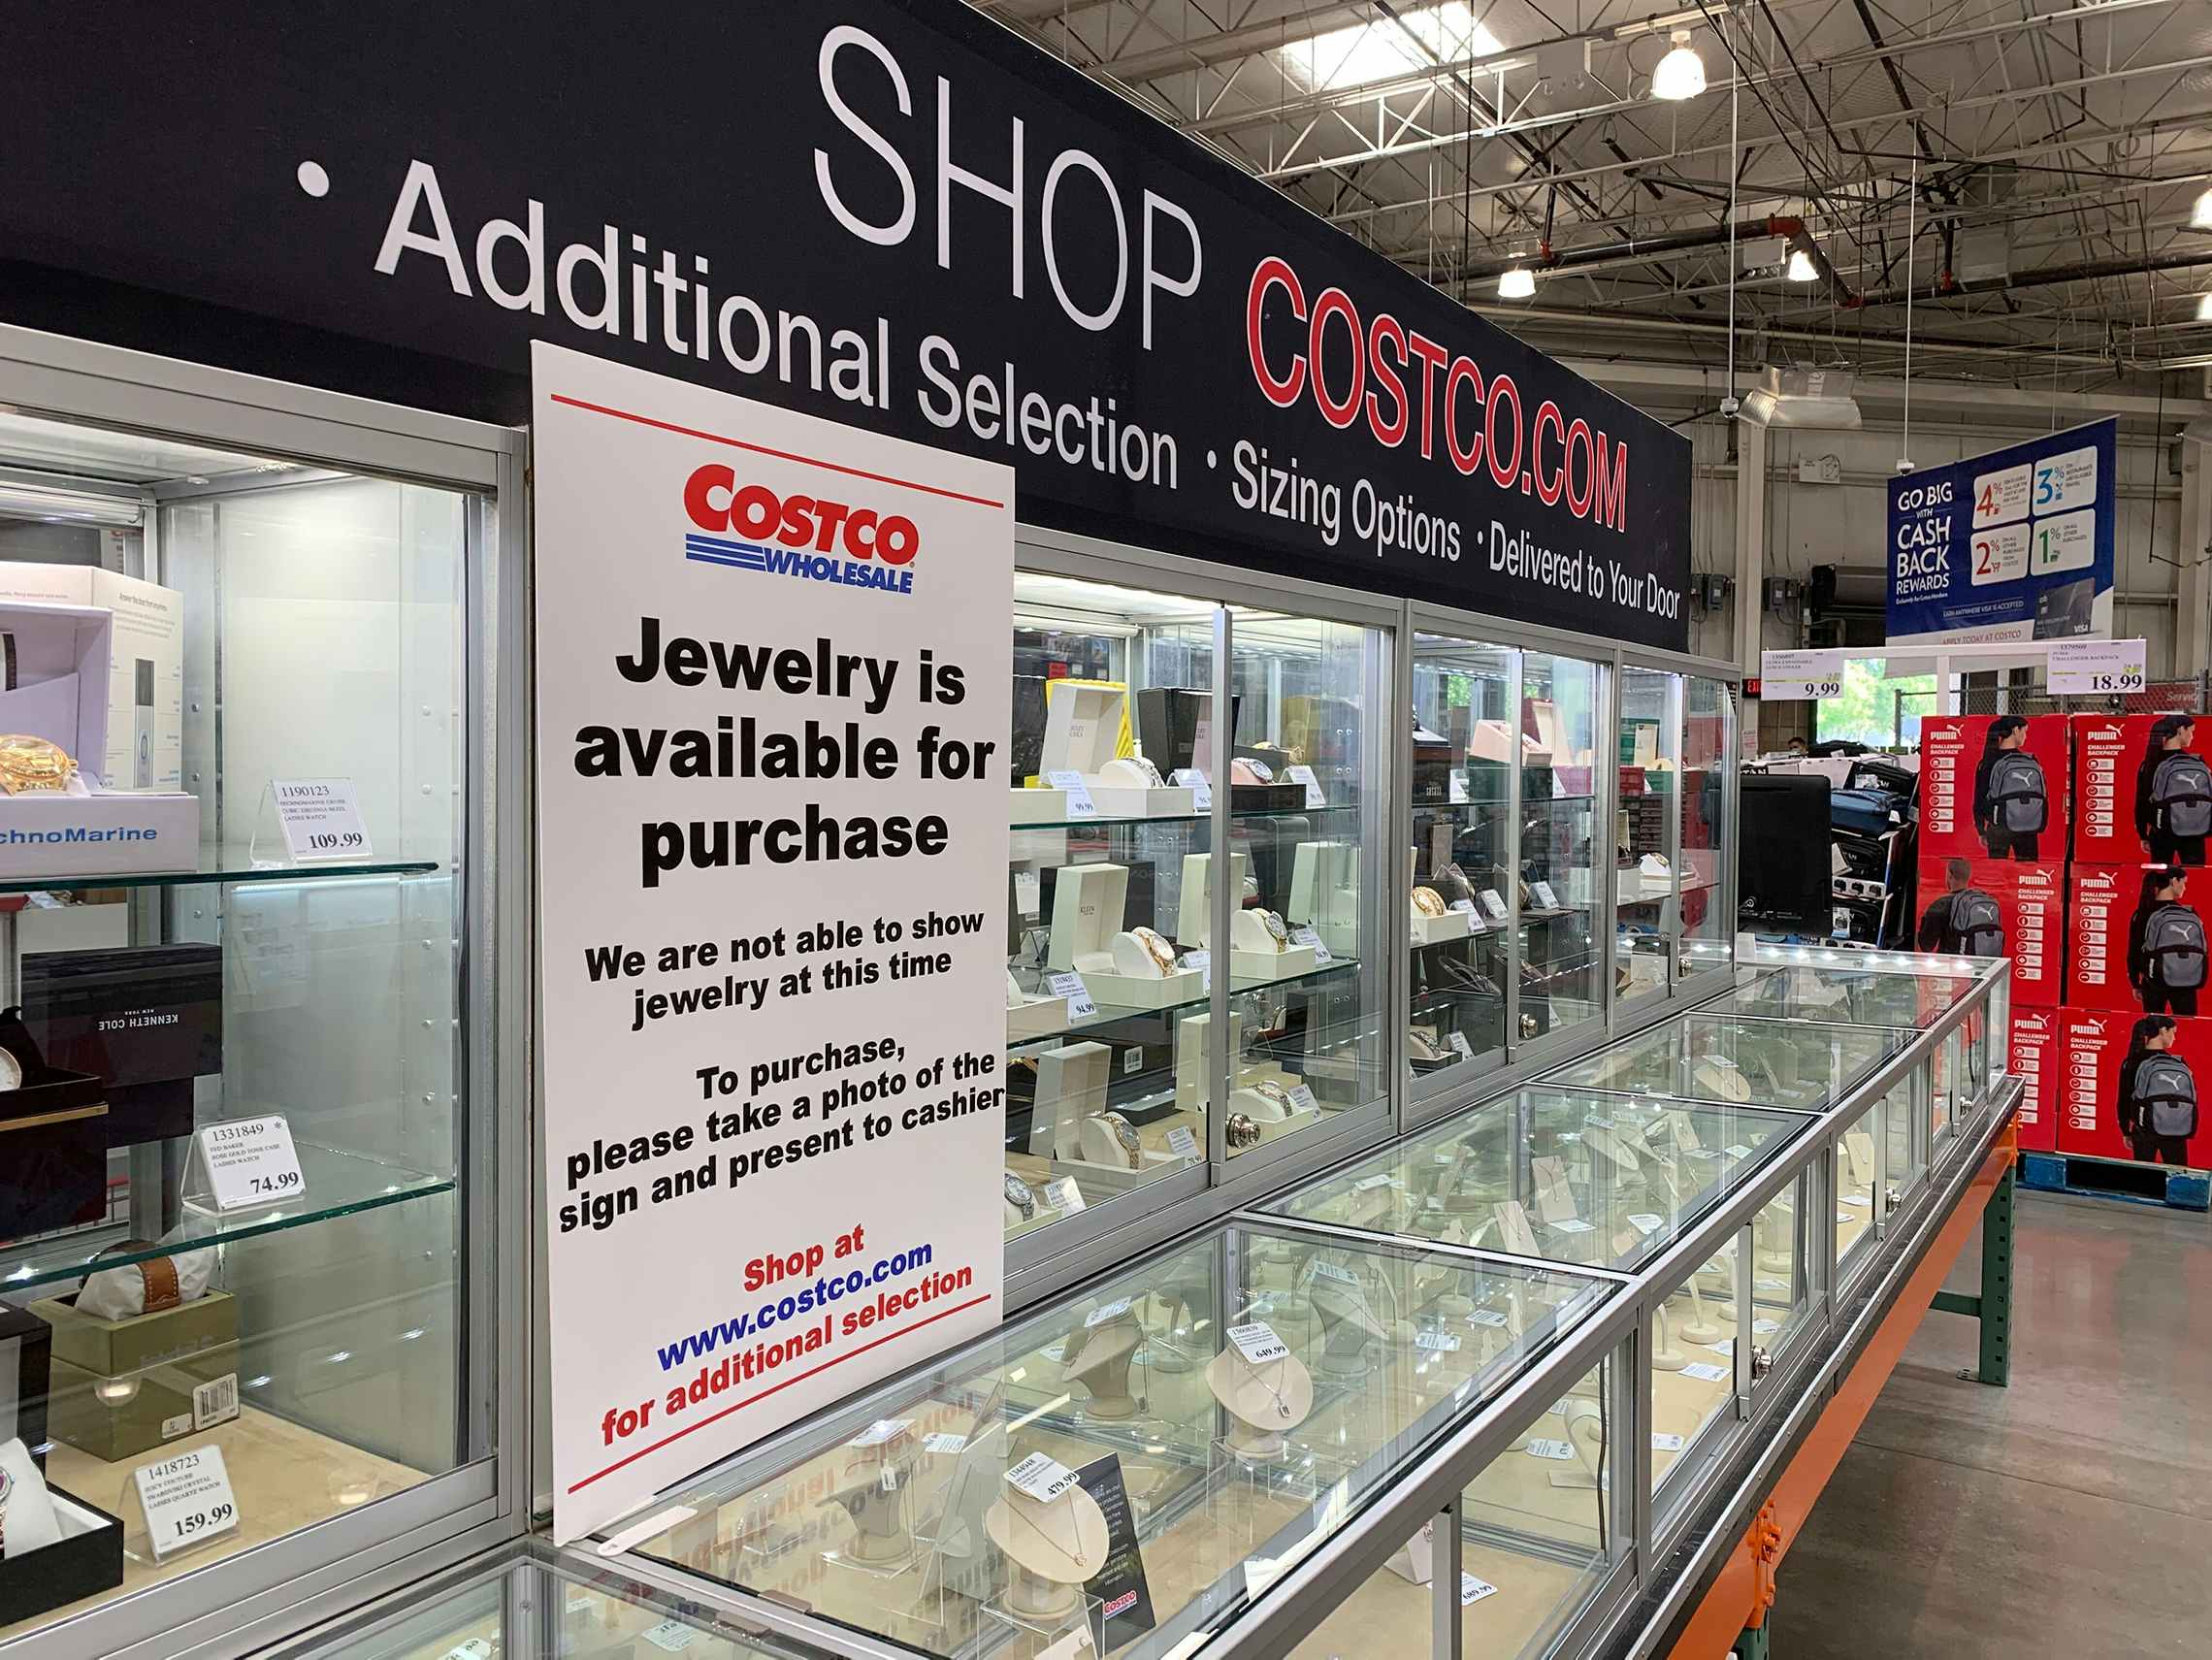 costco jewelry section with shop costco.com sign and covid sign